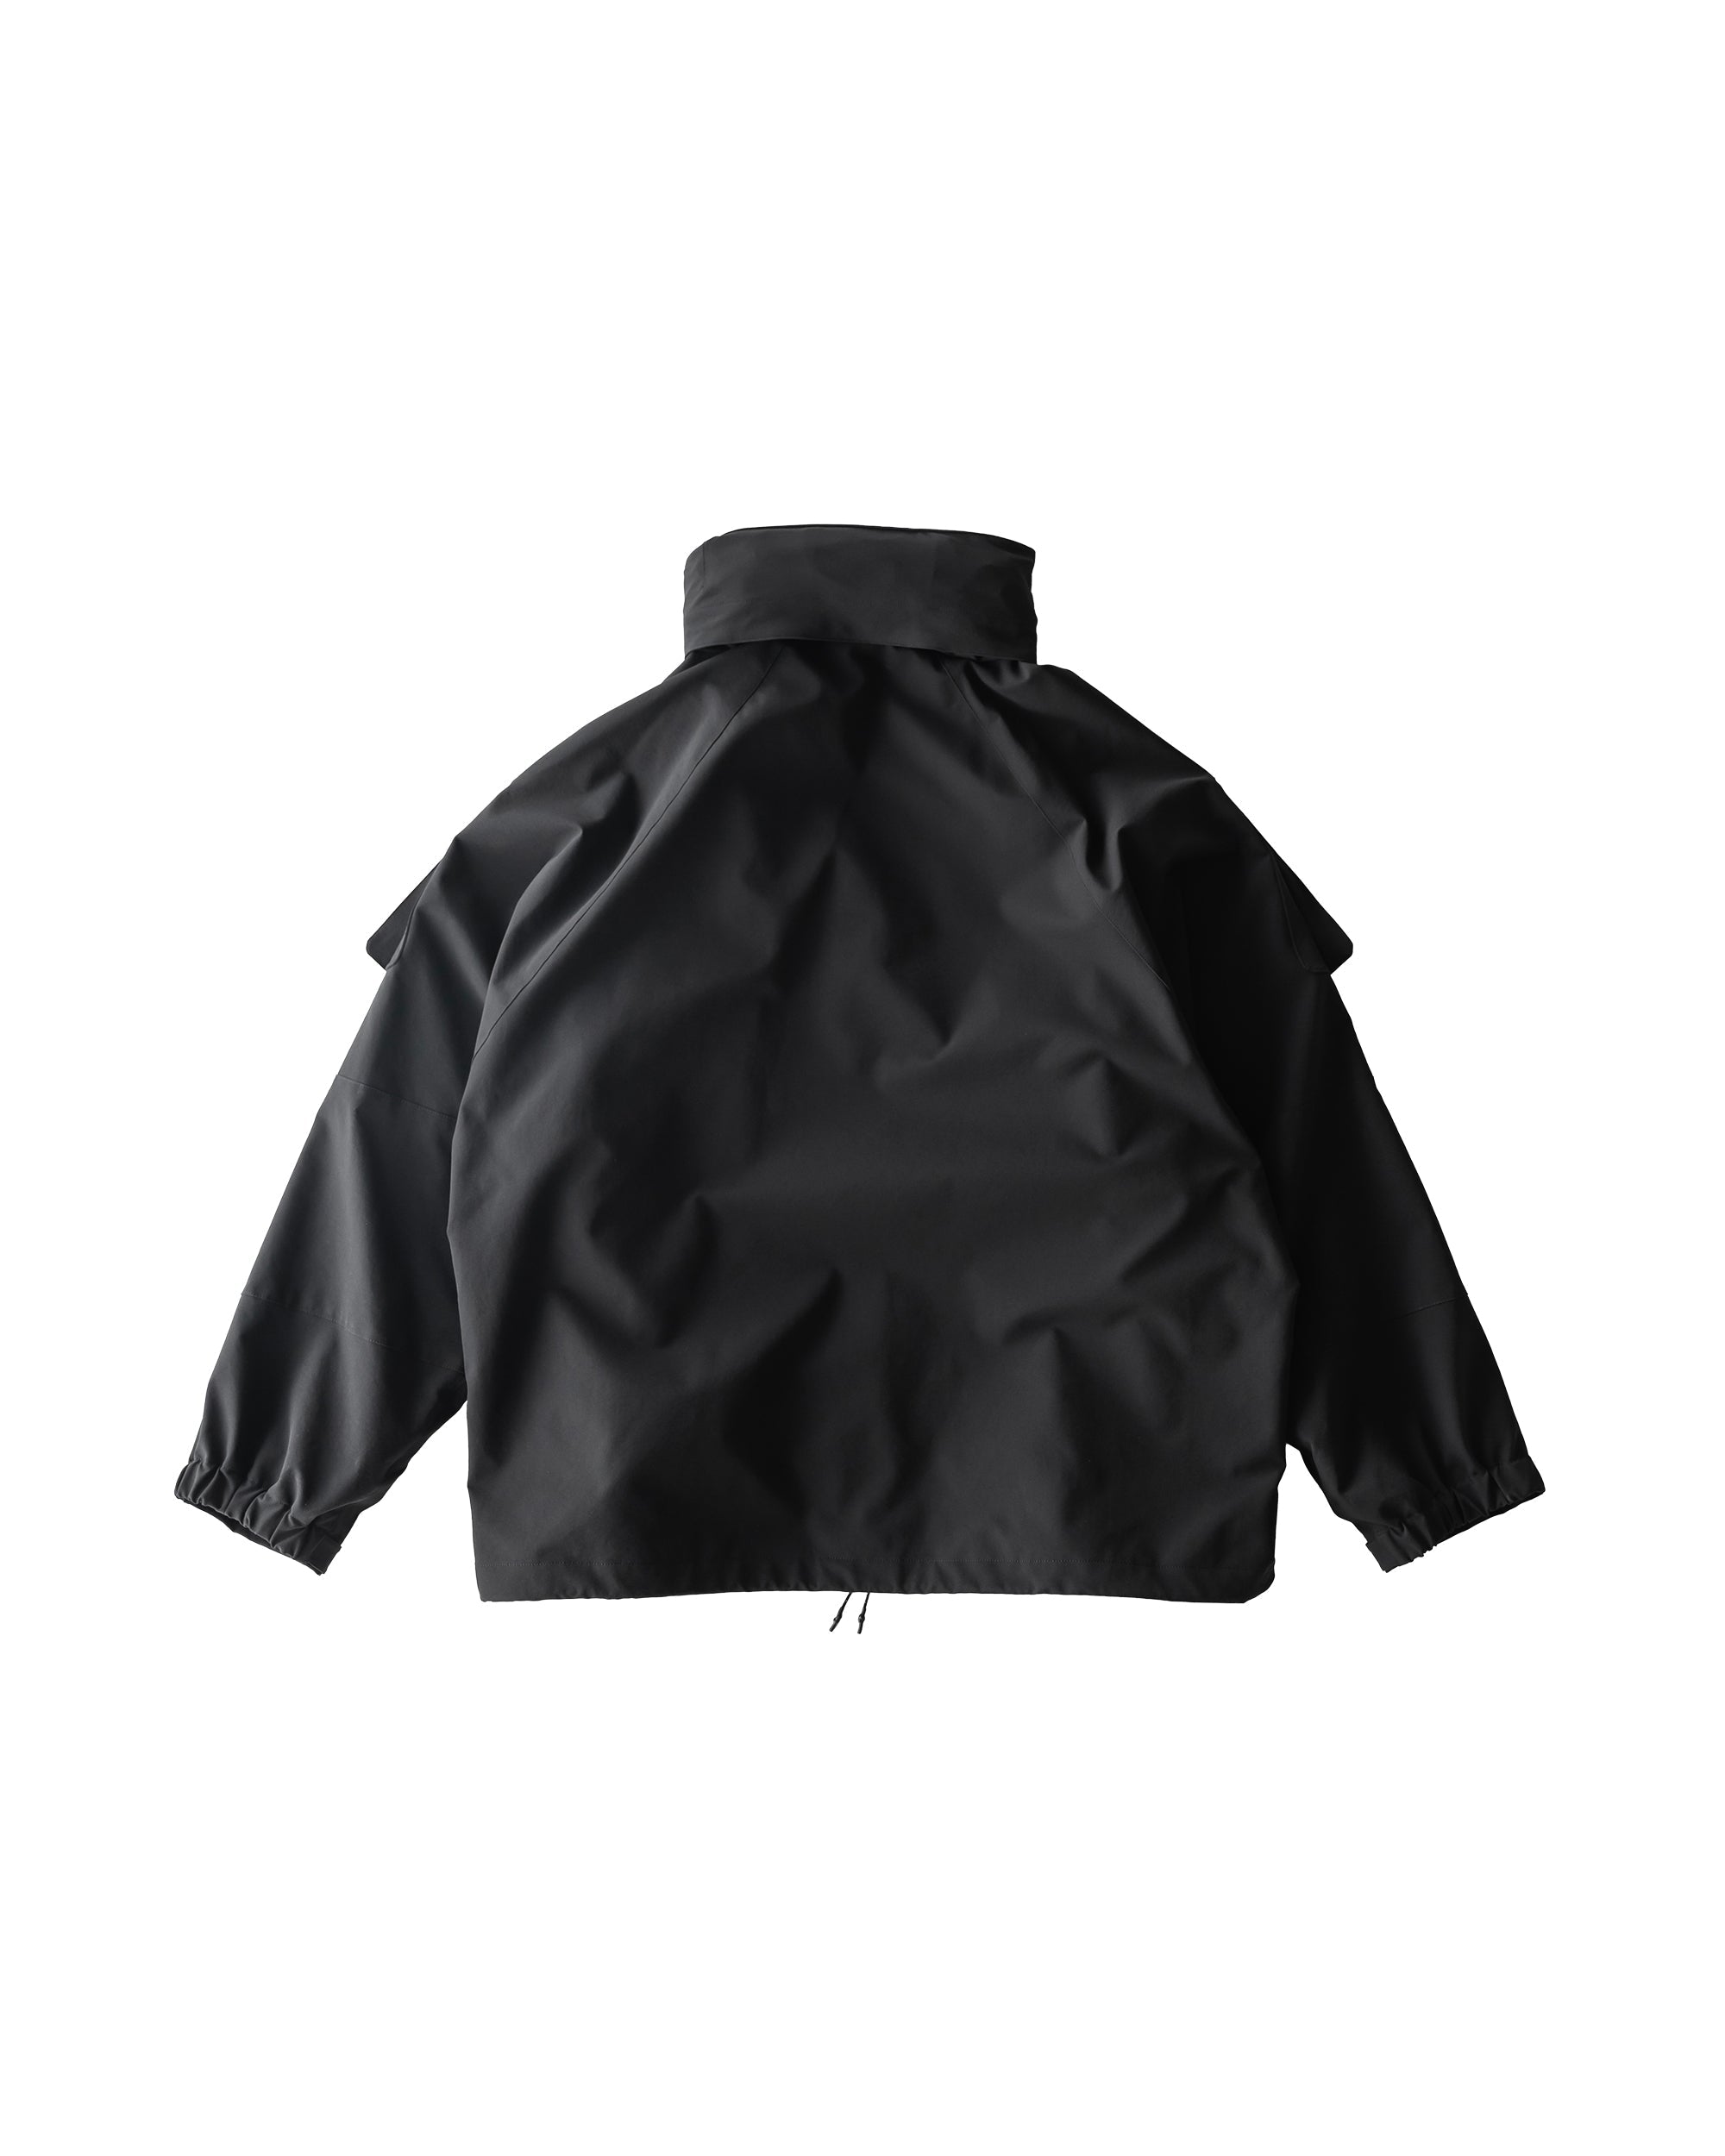 【2.10 sat 20:00- In stock】SOFTSHELL MILITARY JACKET.